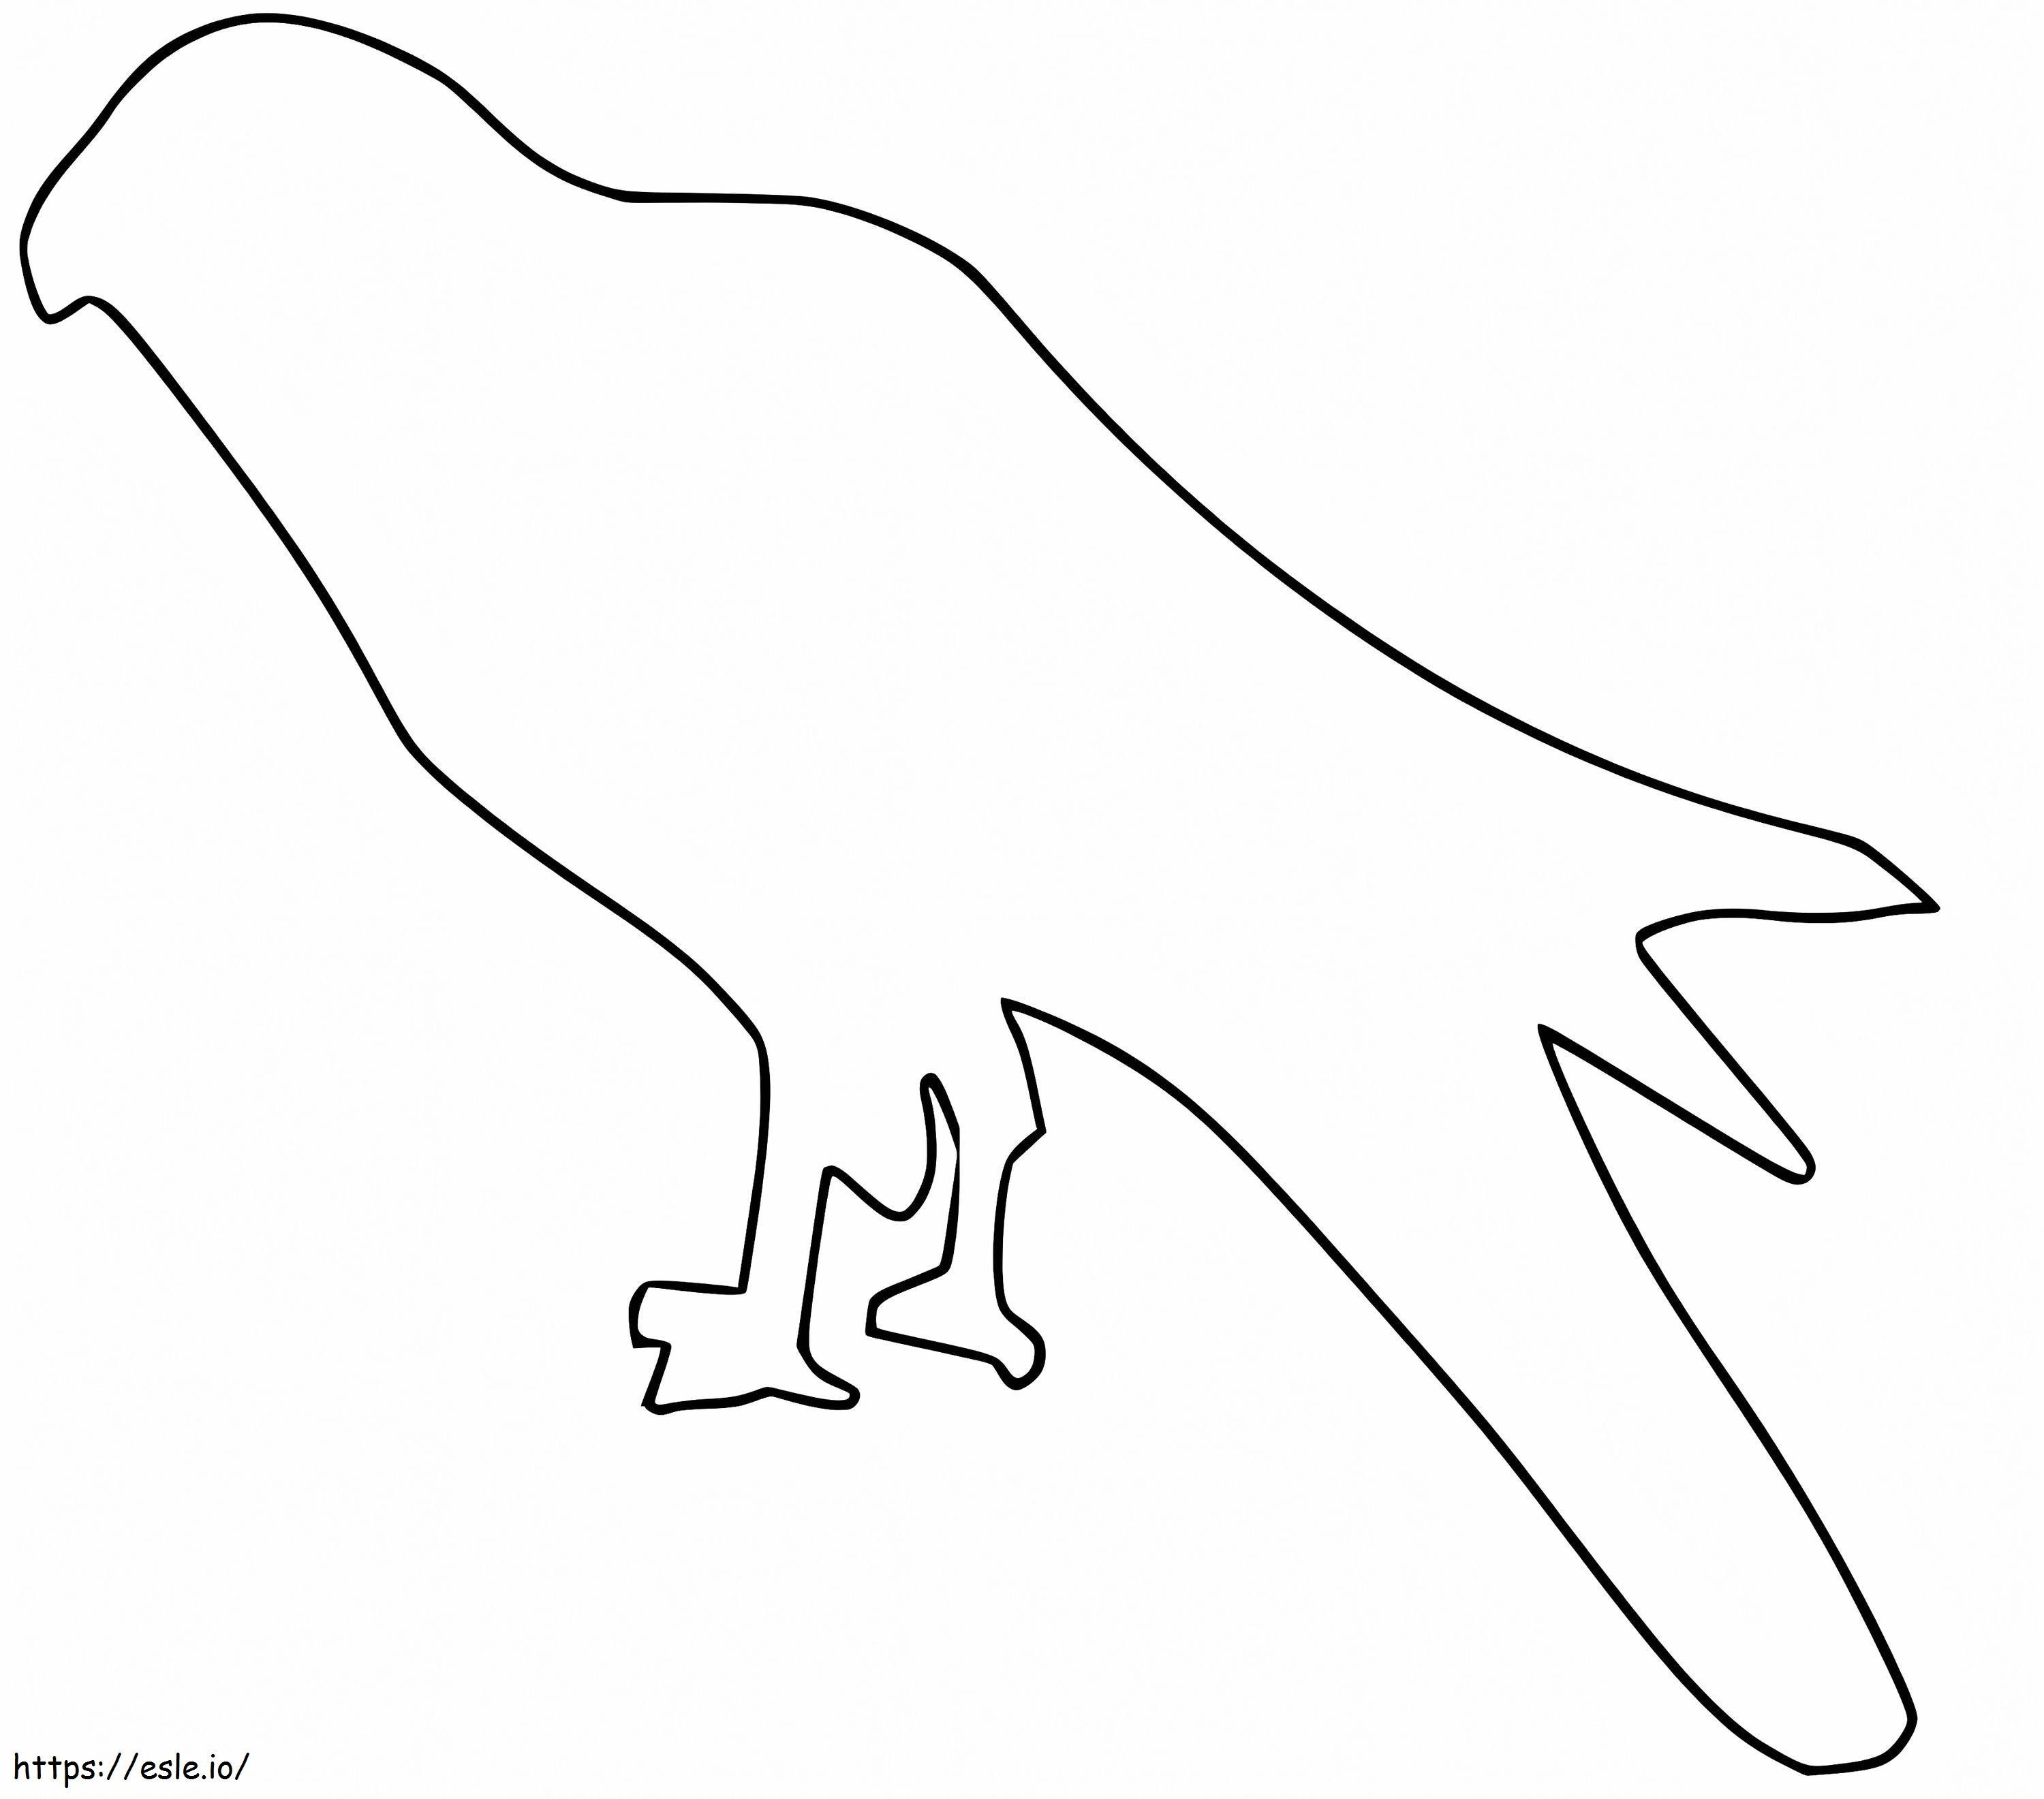 Kite Bird Outline coloring page